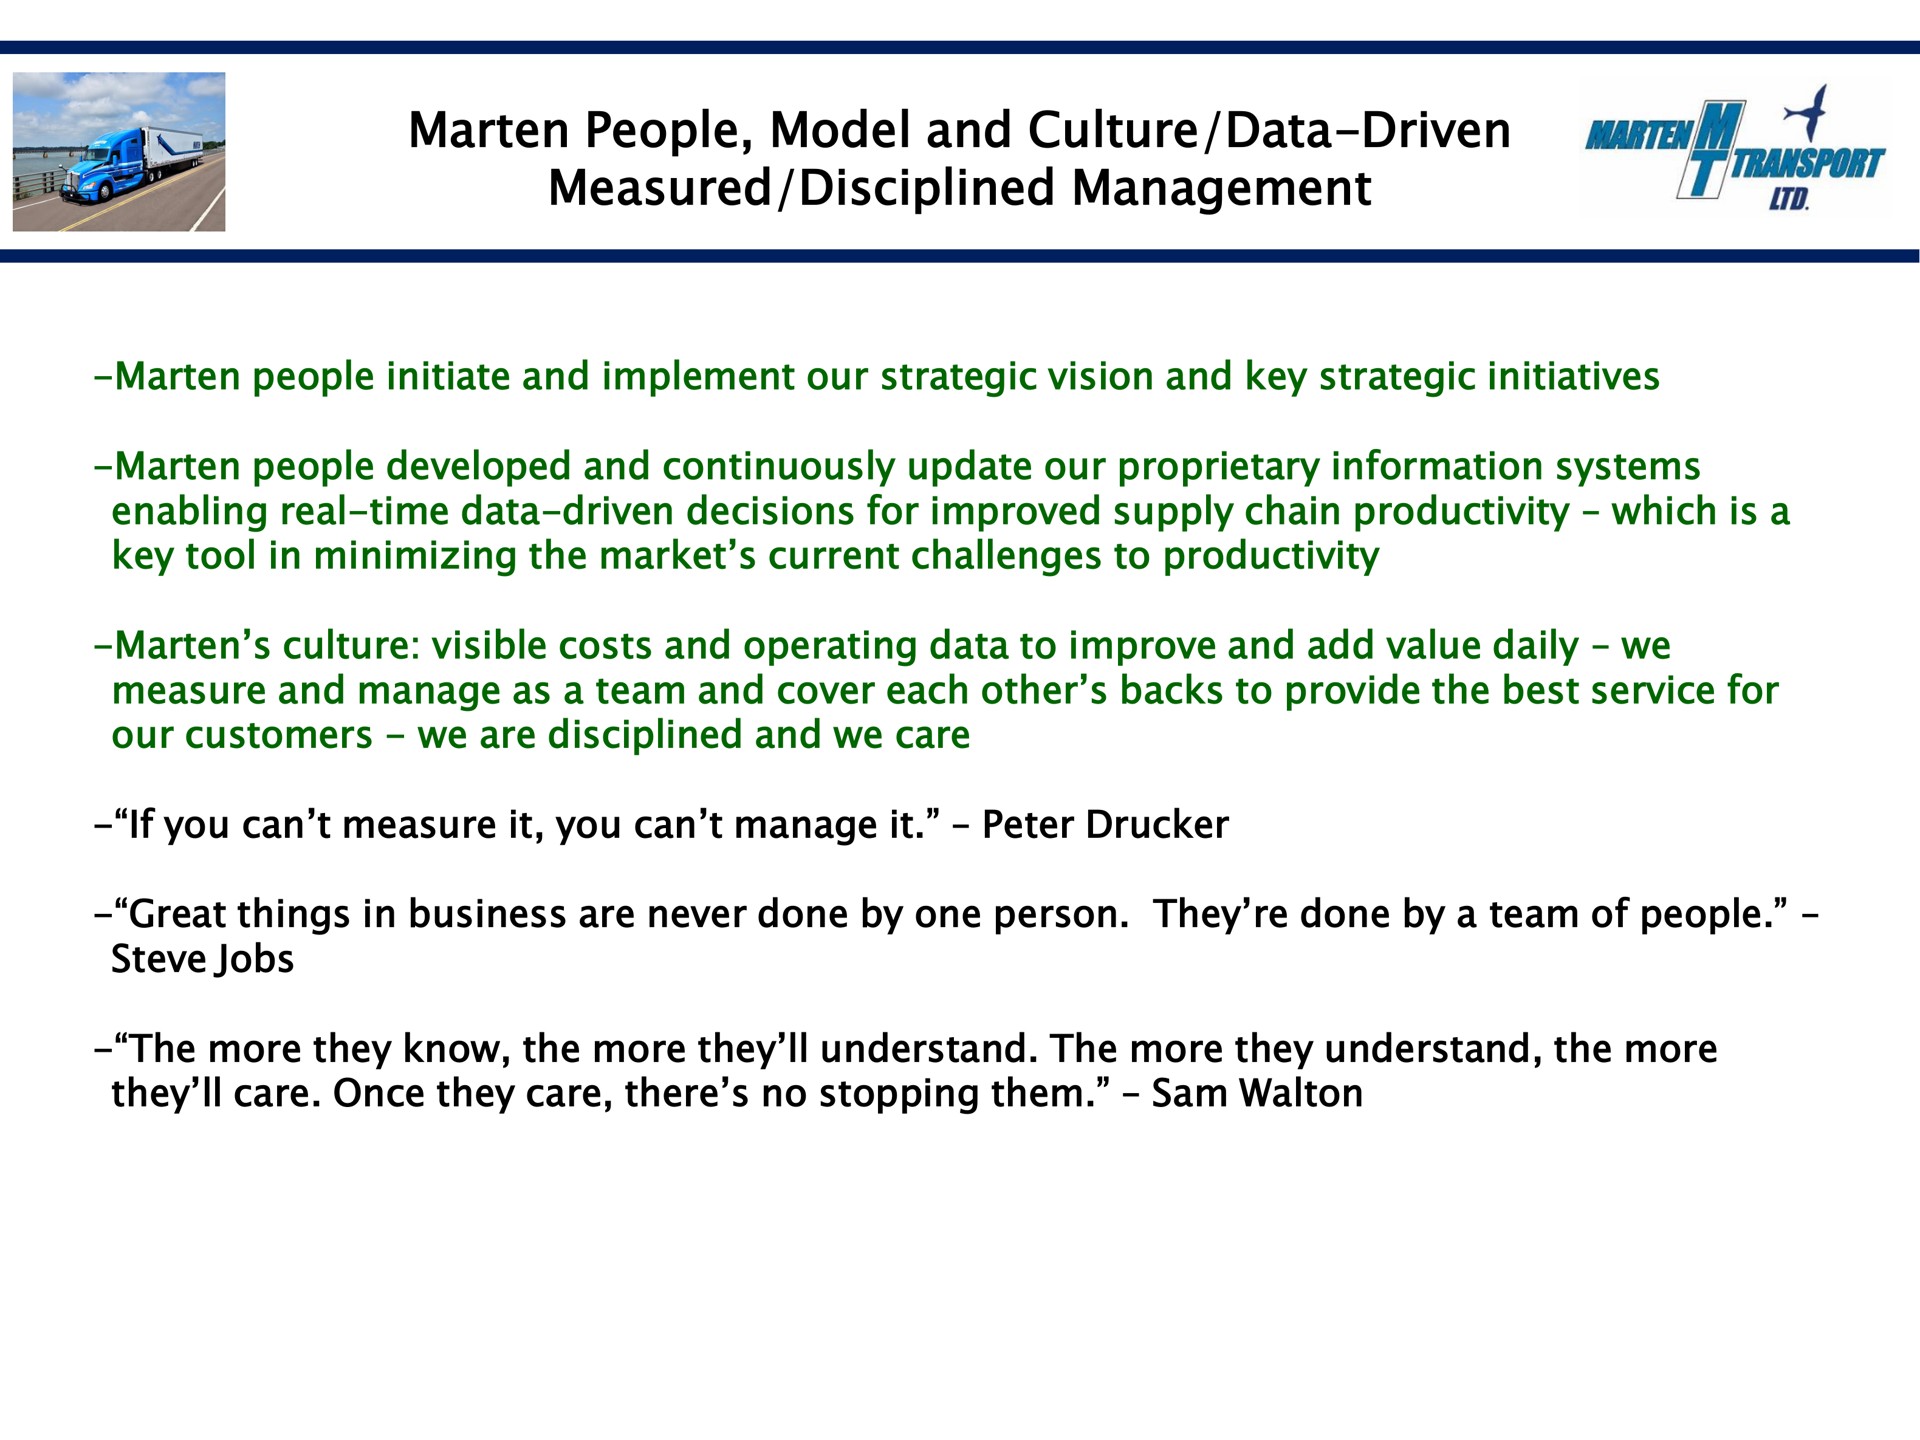 marten people model and culture data driven measured disciplined management marten people initiate and implement our strategic vision and key strategic initiatives marten people developed and continuously update our proprietary information systems enabling real time data driven decisions for improved supply chain productivity which is a key tool in minimizing the market current challenges to productivity marten culture visible costs and operating data to improve and add value daily we measure and manage as a team and cover each other backs to provide the best service for our customers we are disciplined and we care if you can measure it you can manage it peter great things in business are never done by one person they done by a team of people jobs the more they know the more they understand the more they understand the more they care once they care there no stopping them sam wat soon | Marten Transport